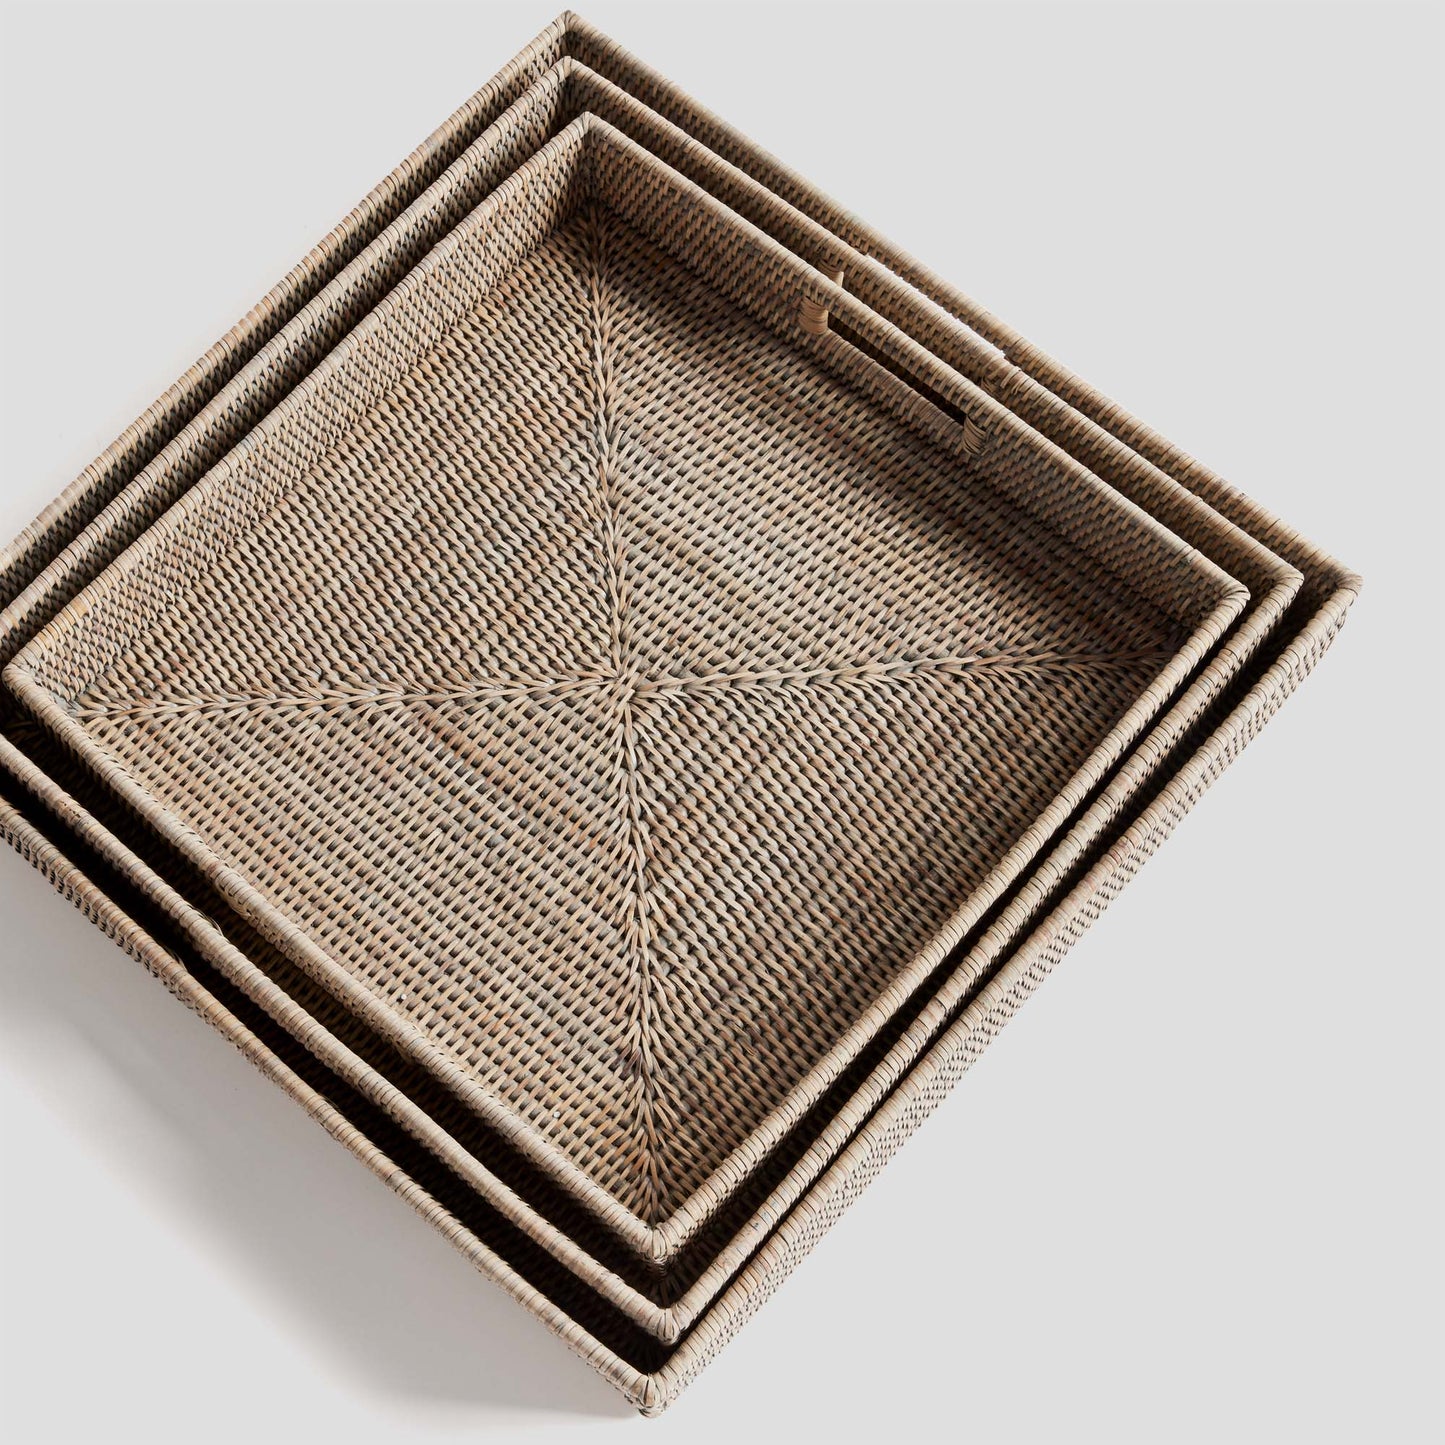 Woven square ottoman tray set in rattan with whitewash finish, nested top view, gray background.